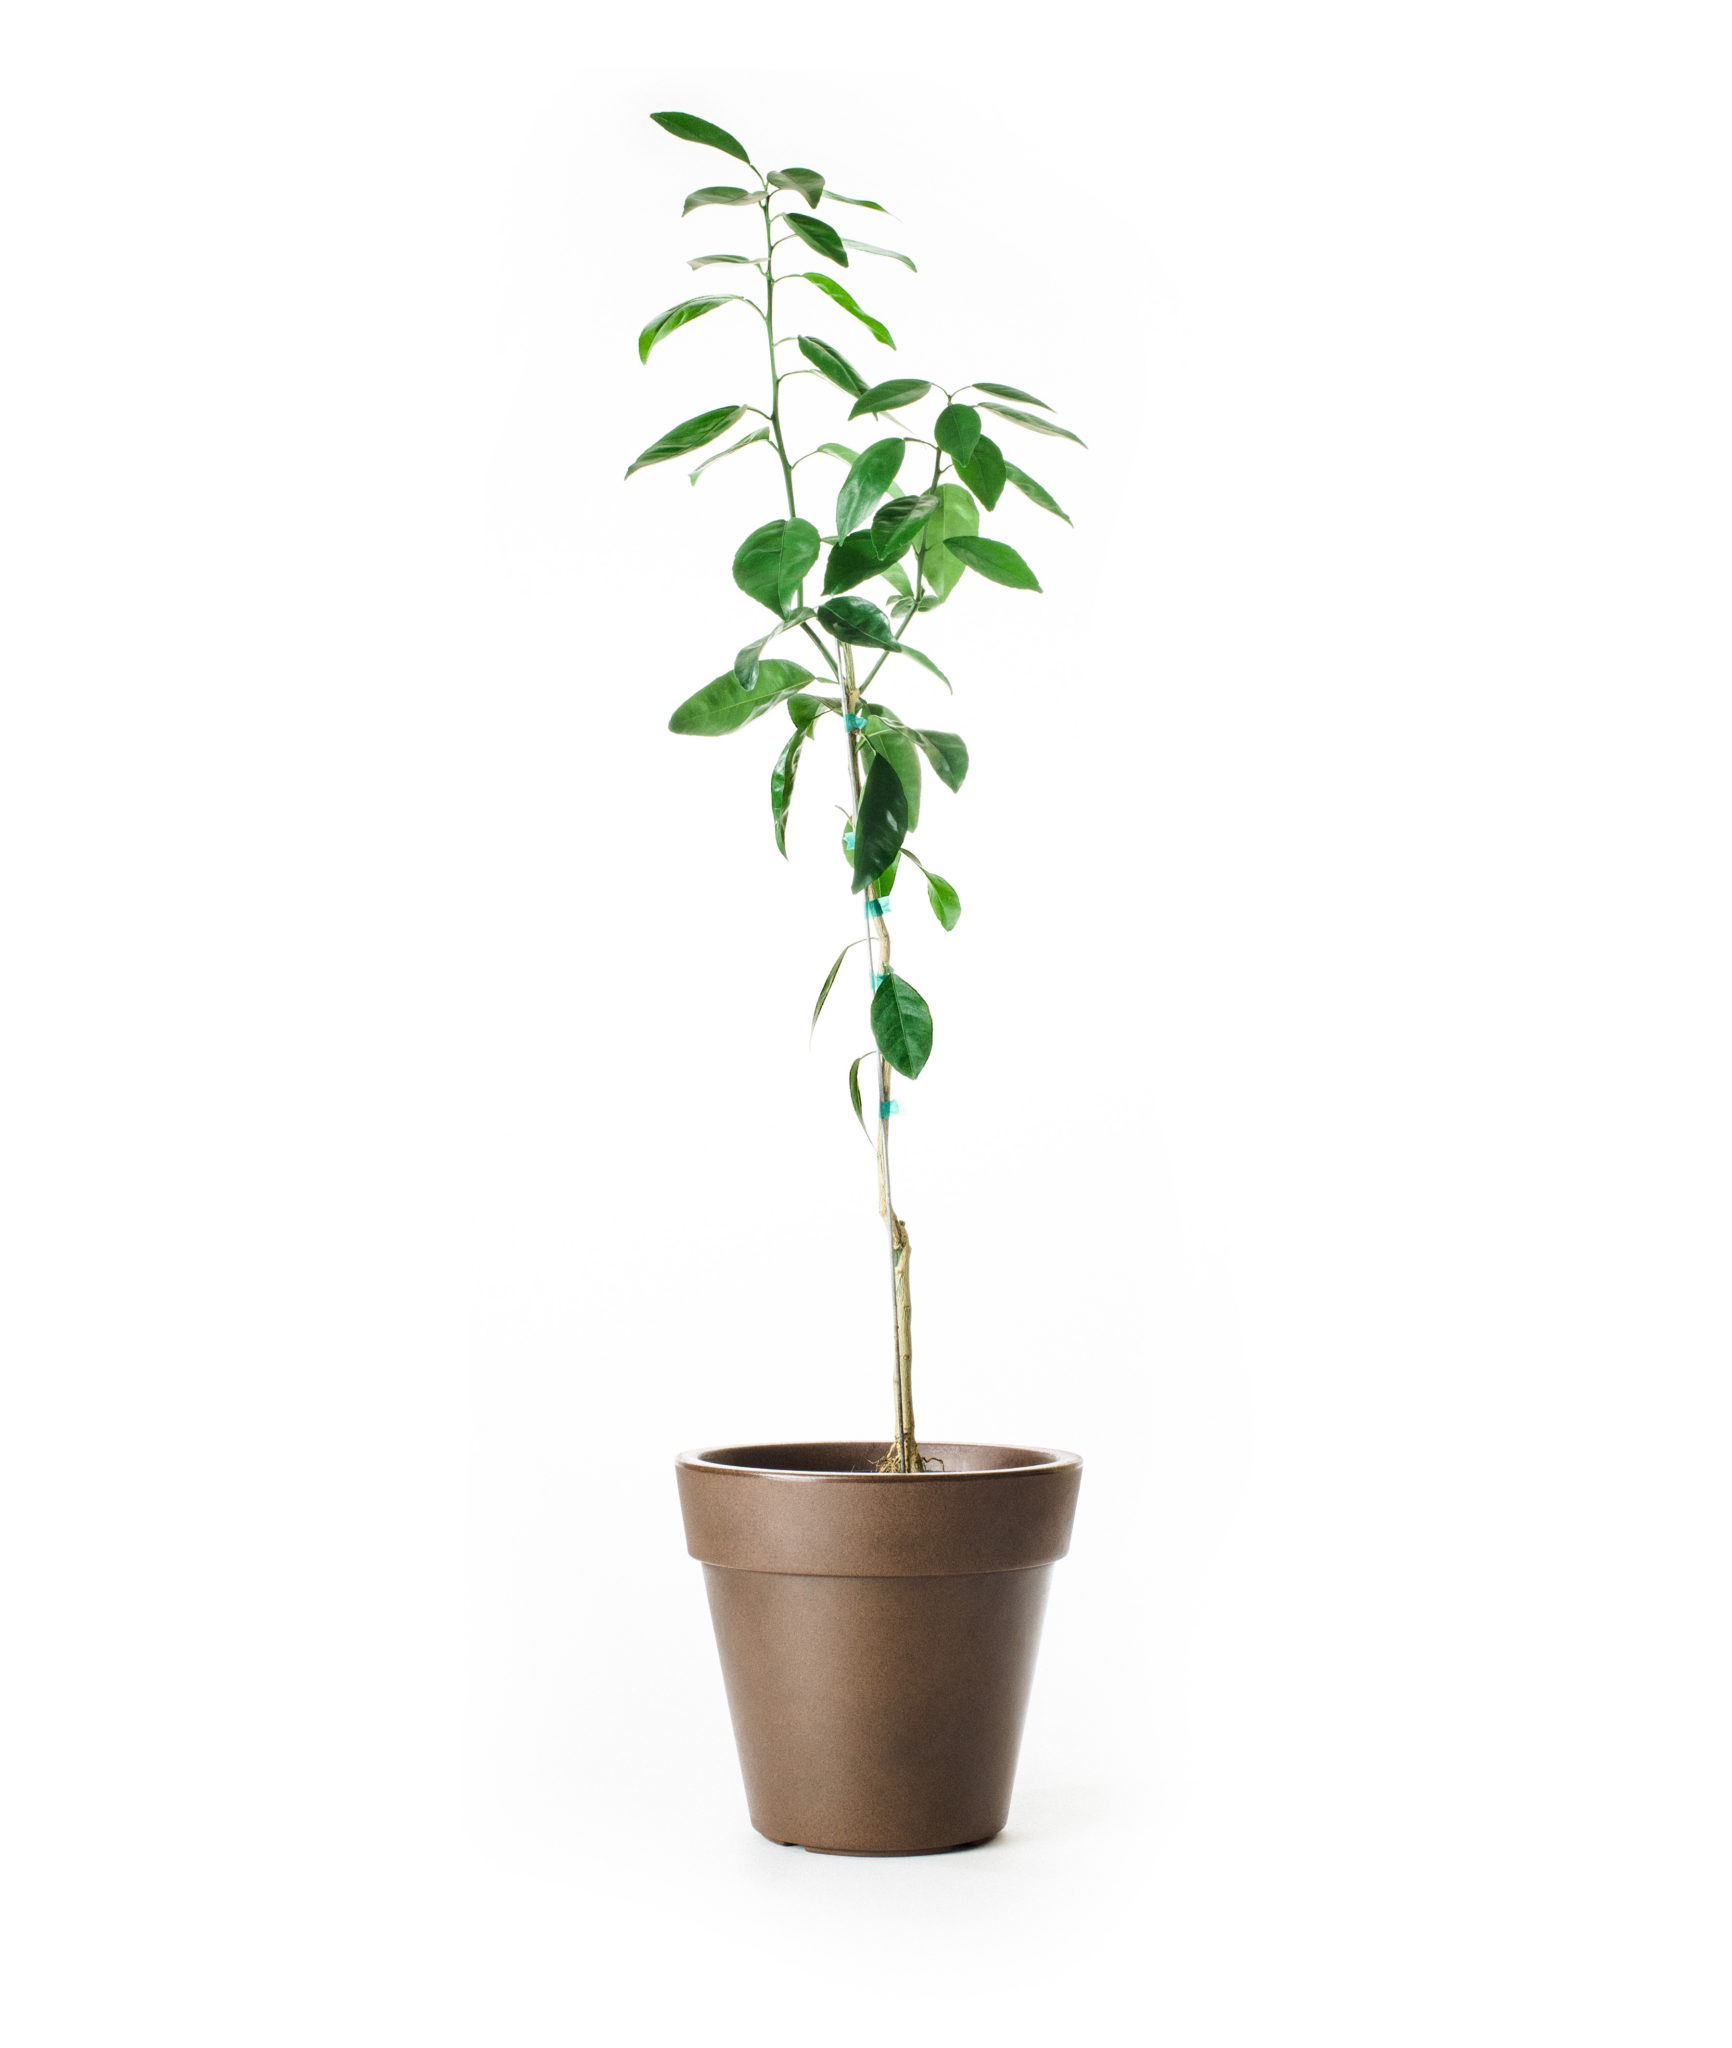 Image of Owari Satsuma Tree (Age: 4 - 5 Years Height: 3 - 4 FT Ship Method: Delivery)